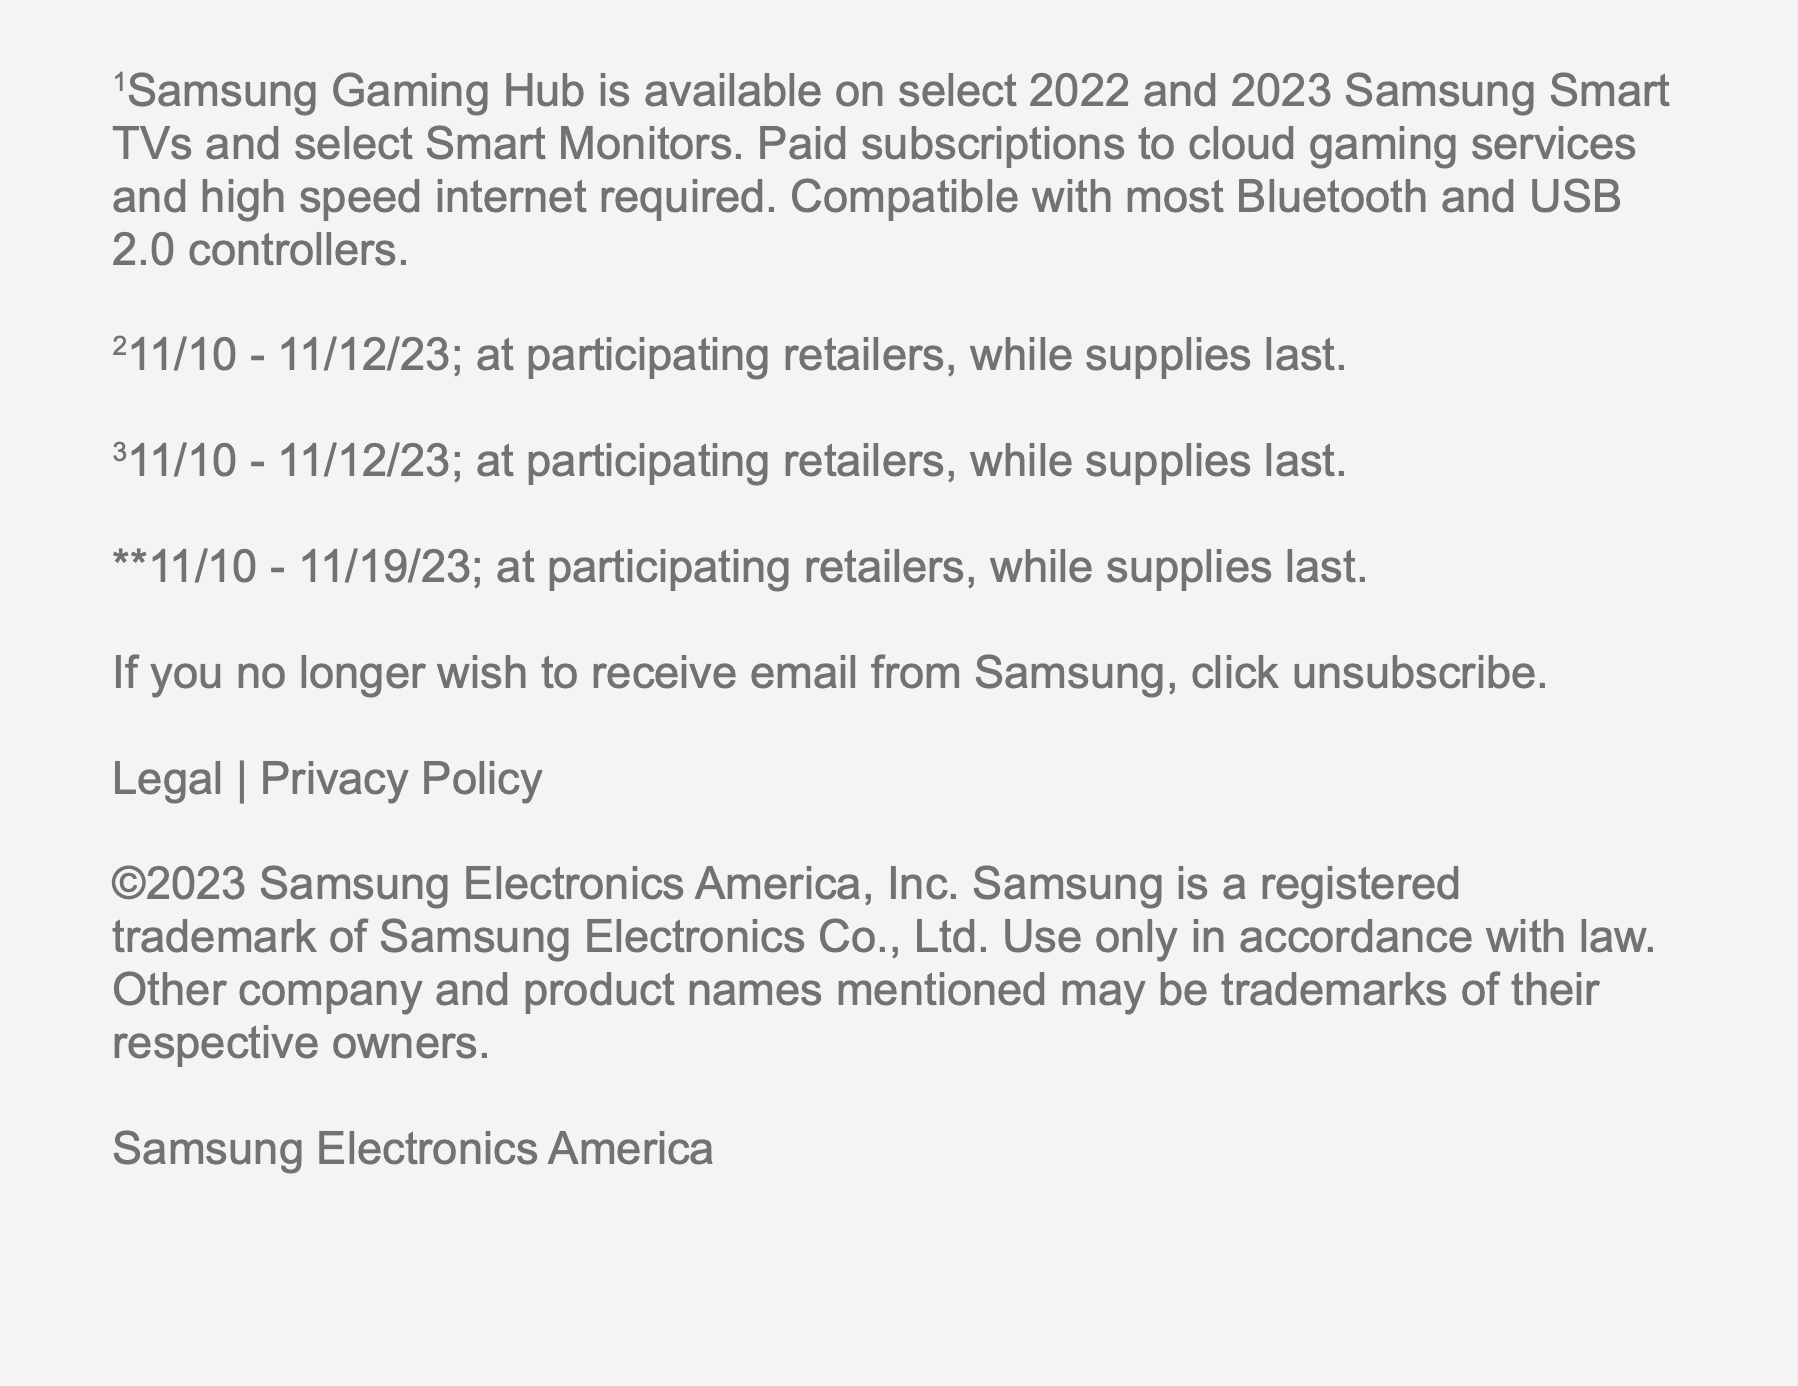 1Samsung Gaming Hub is available on select 2022 and 2023 Samsung Smart TVs and select Smart Monitors. Paid subscriptions to cloud gaming services and high speed internet required. Compatible with most Bluetooth and USB 2.0 controllers. 211/10 - 11/12/23; at participating retailers, while supplies last. 311/10 - 11/12/23; at participating retailers, while supplies last. **11/10 - 11/19/23; at
 participating retailers, while supplies last. If you no longer wish to receive email from Samsung, click unsubscribe. Legal | Privacy Policy 2023 Samsung Electronics America, Inc. Samsung is a registered trademark of Samsung Electronics Co., Ltd. Use only in accordance with law. Other company and product names mentioned may be trademarks of their respective owners. Samsung Electronics America